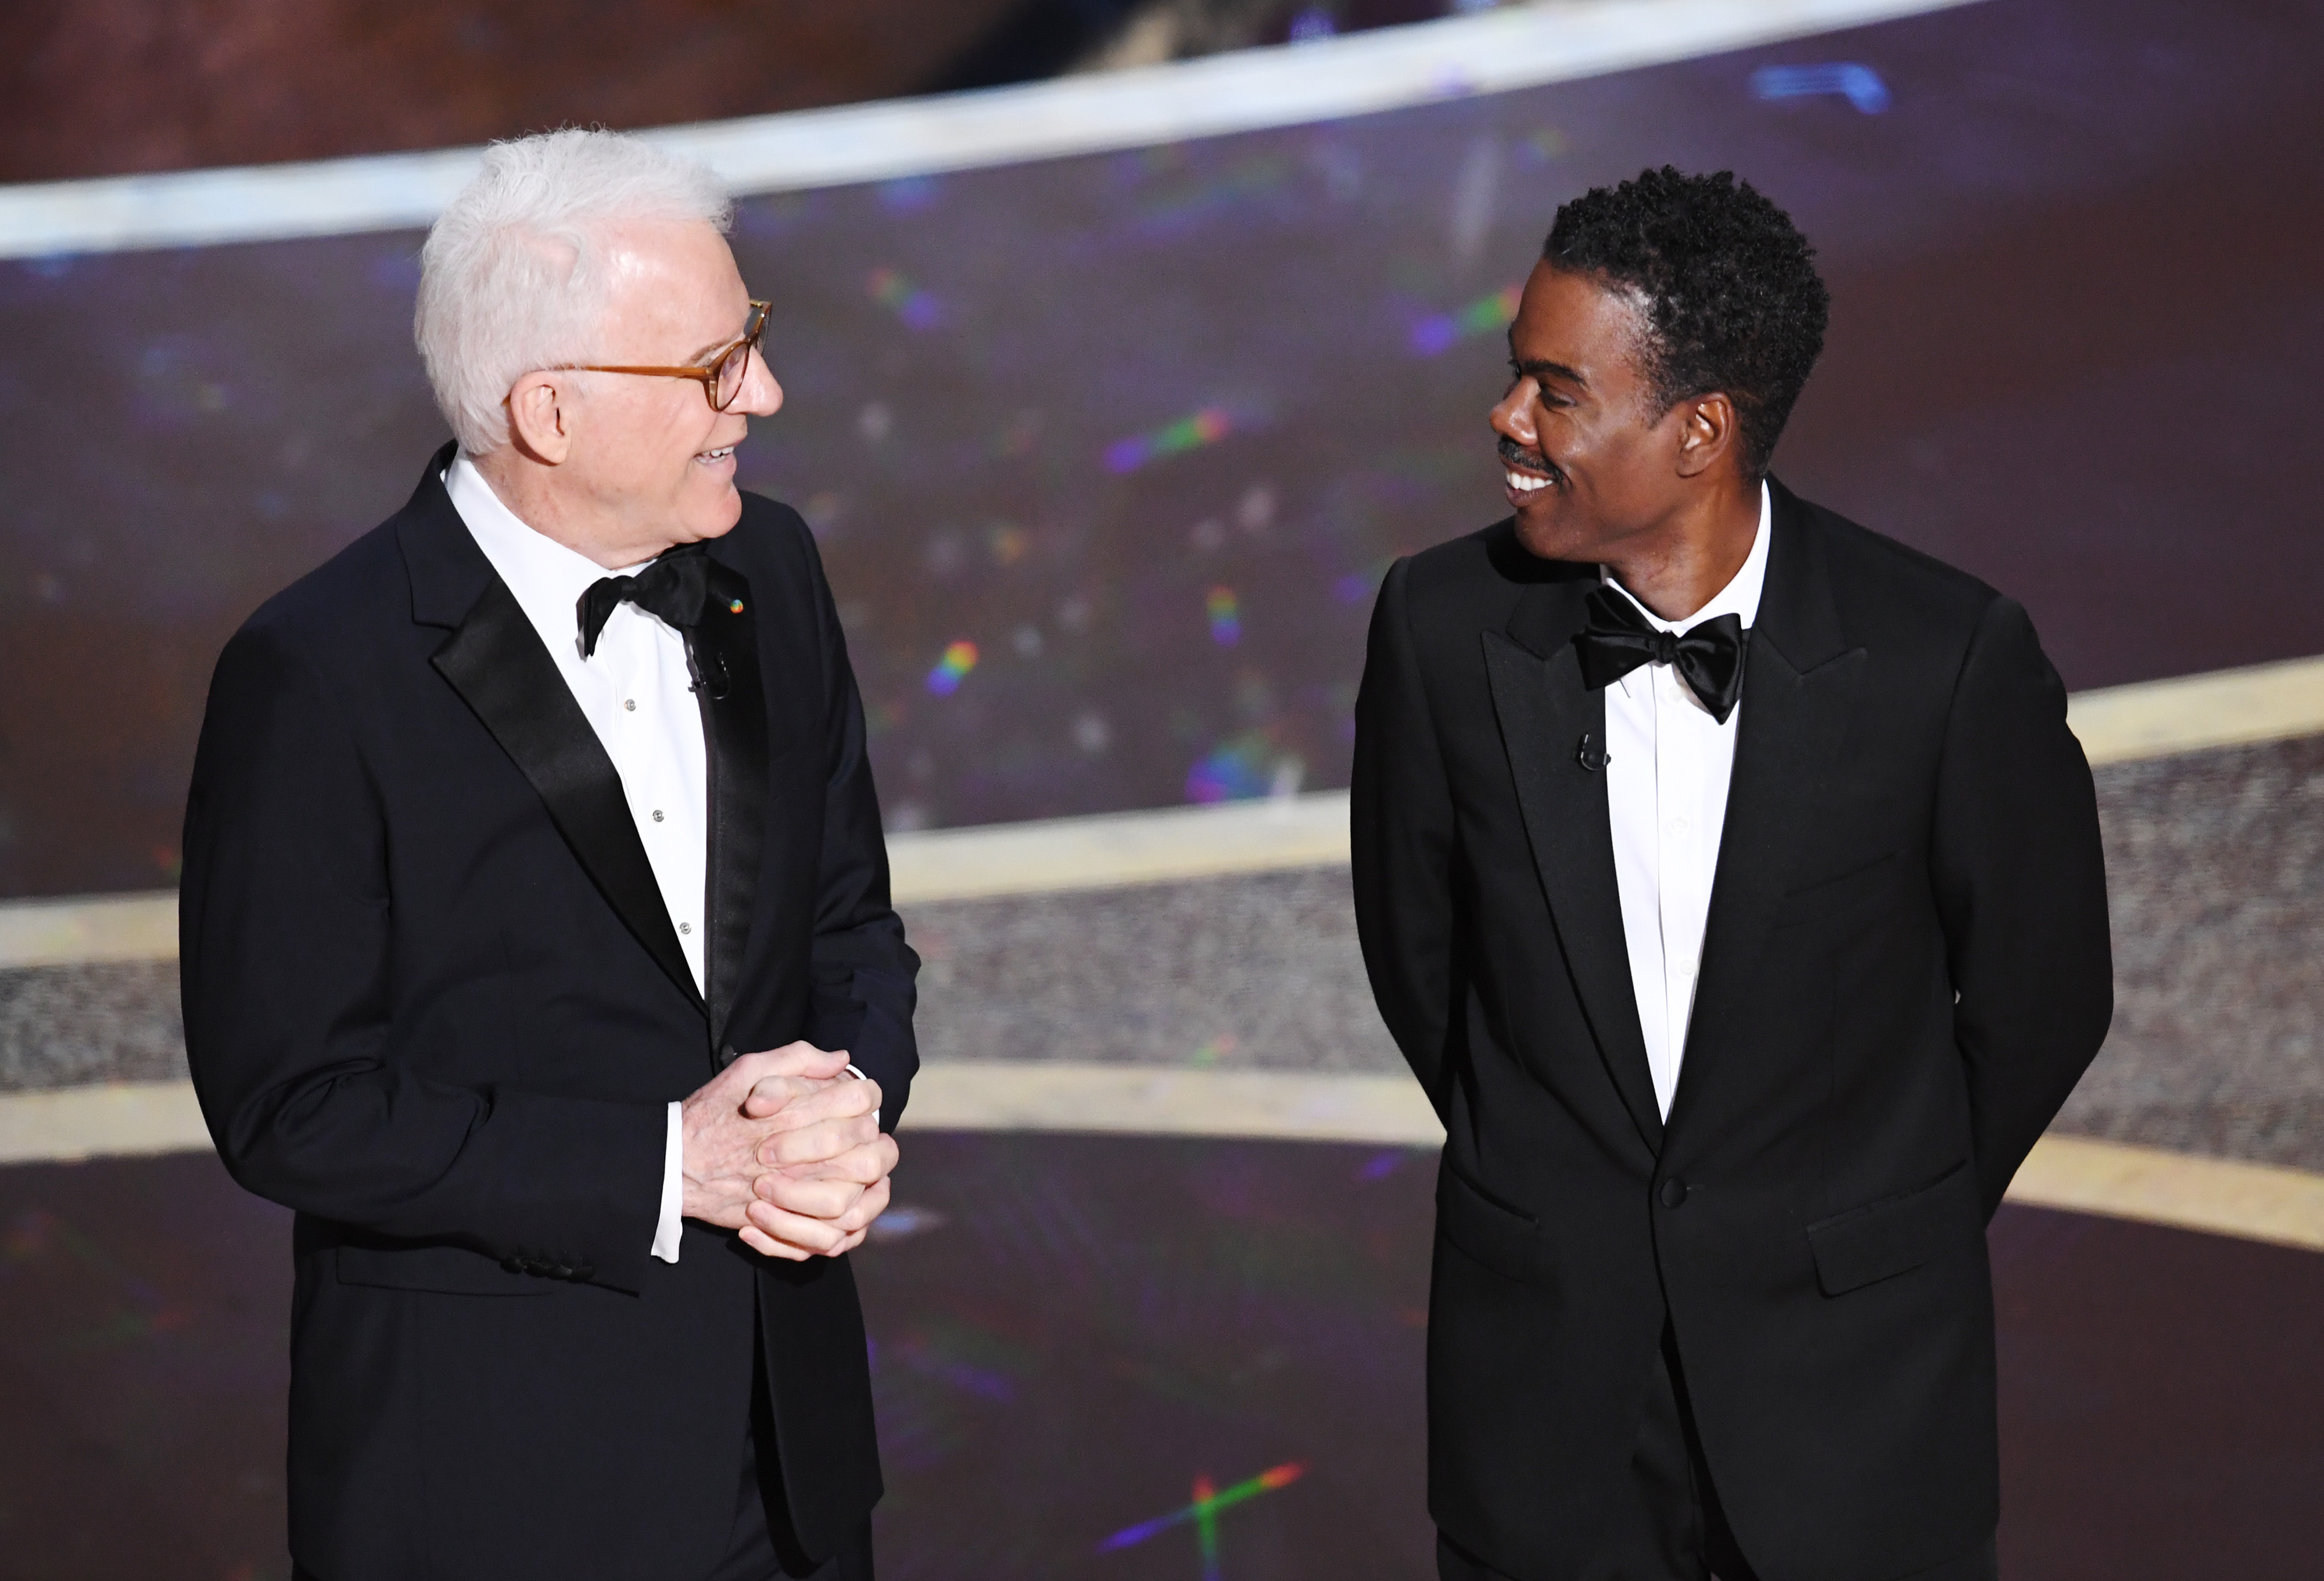 HOLLYWOOD, Steve Martin and Chris Rock onstage during the 92nd Annual Academy Awards on February 09, 2020 in Hollywood, California. (Getty Images—2020 Getty Images)